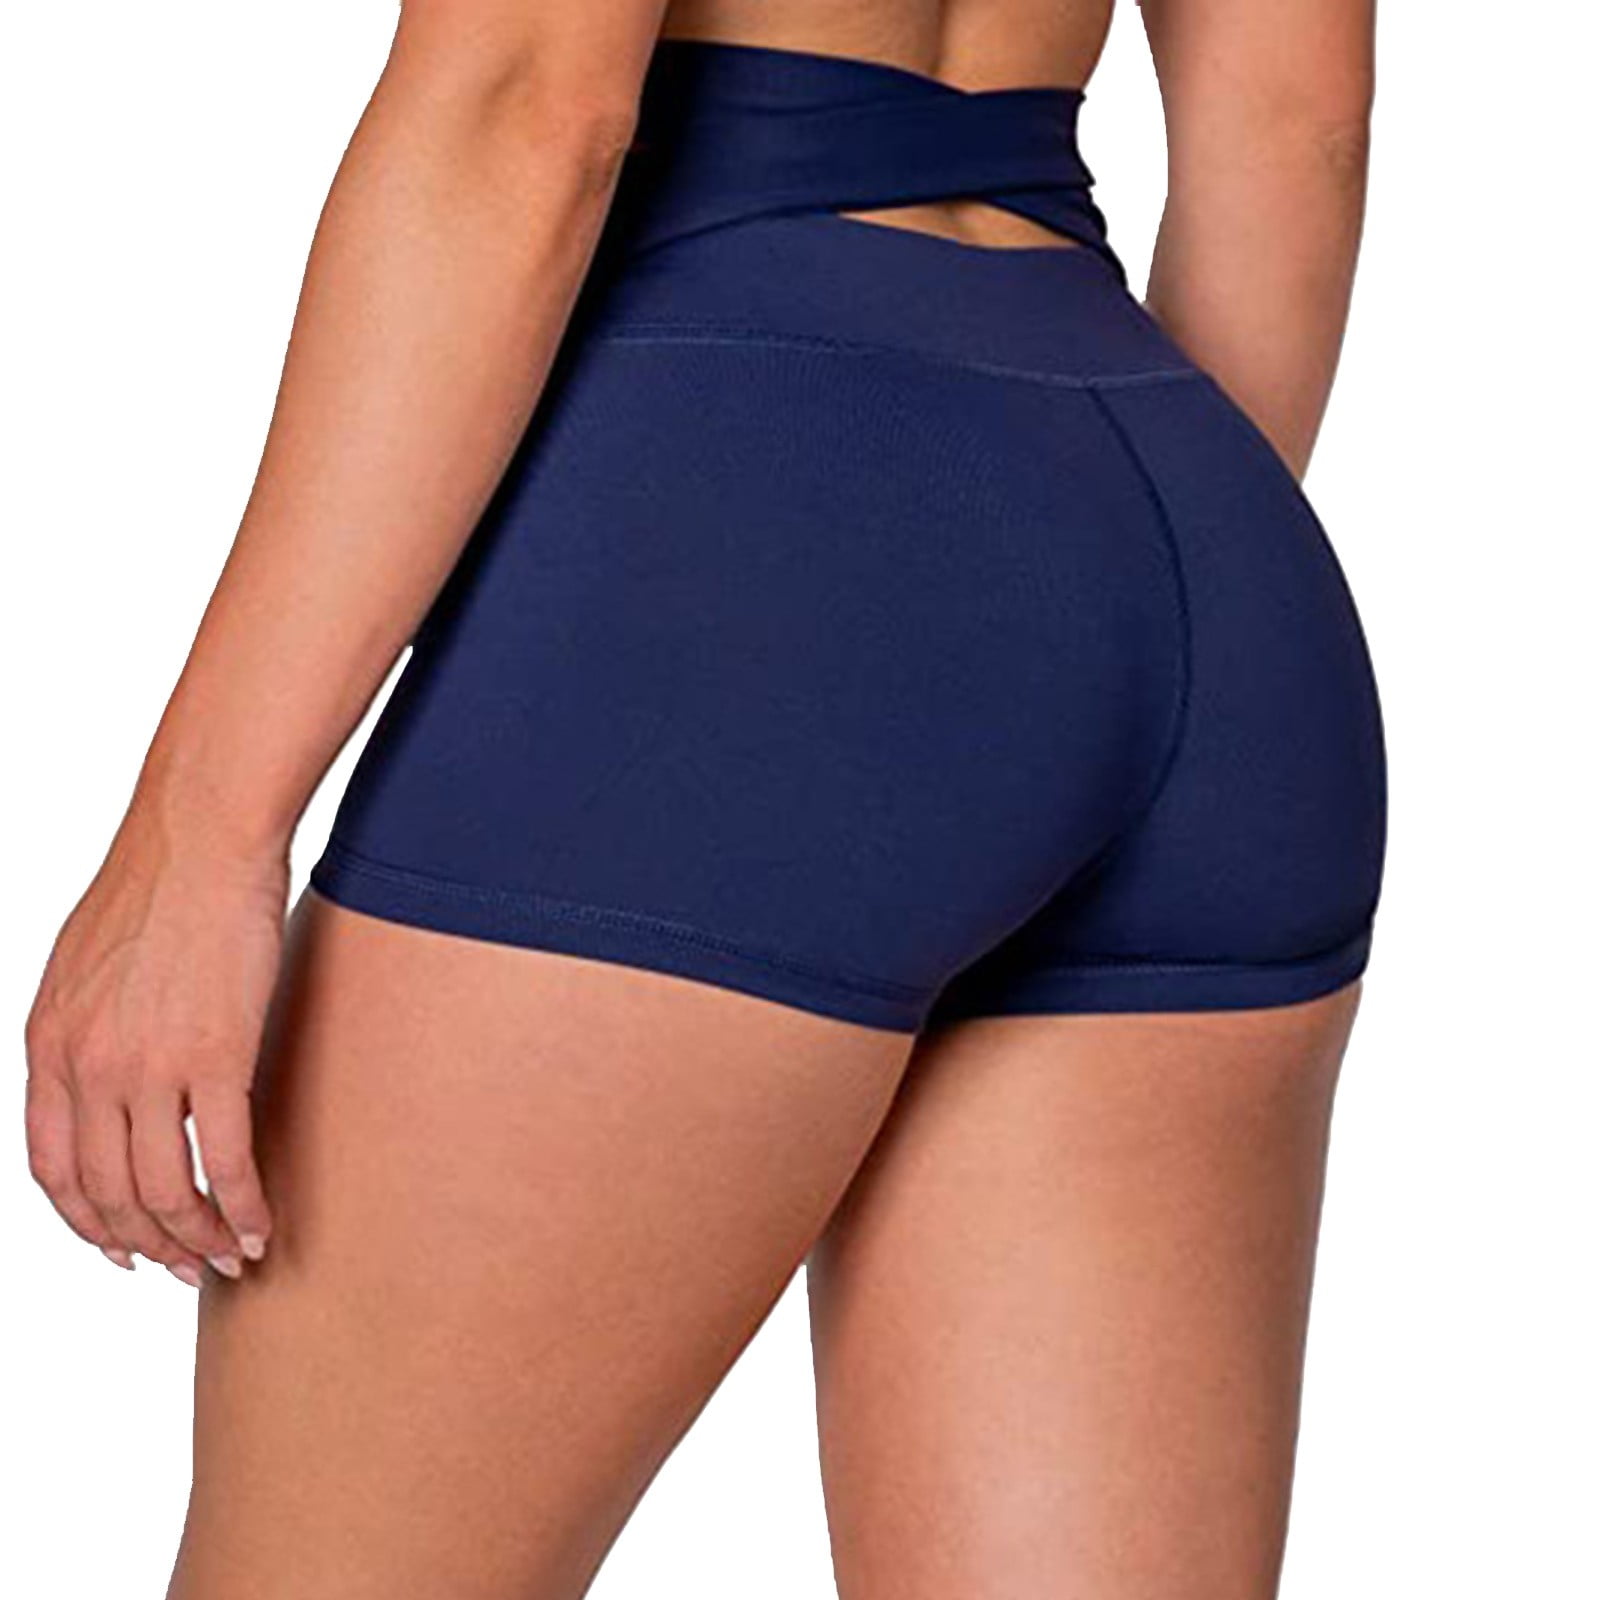 Baocc Yoga Shorts Women's Back Waist Strap High Waist Tight Fitness Solid  Color Stretch Yoga Pants Shorts for Women Black 